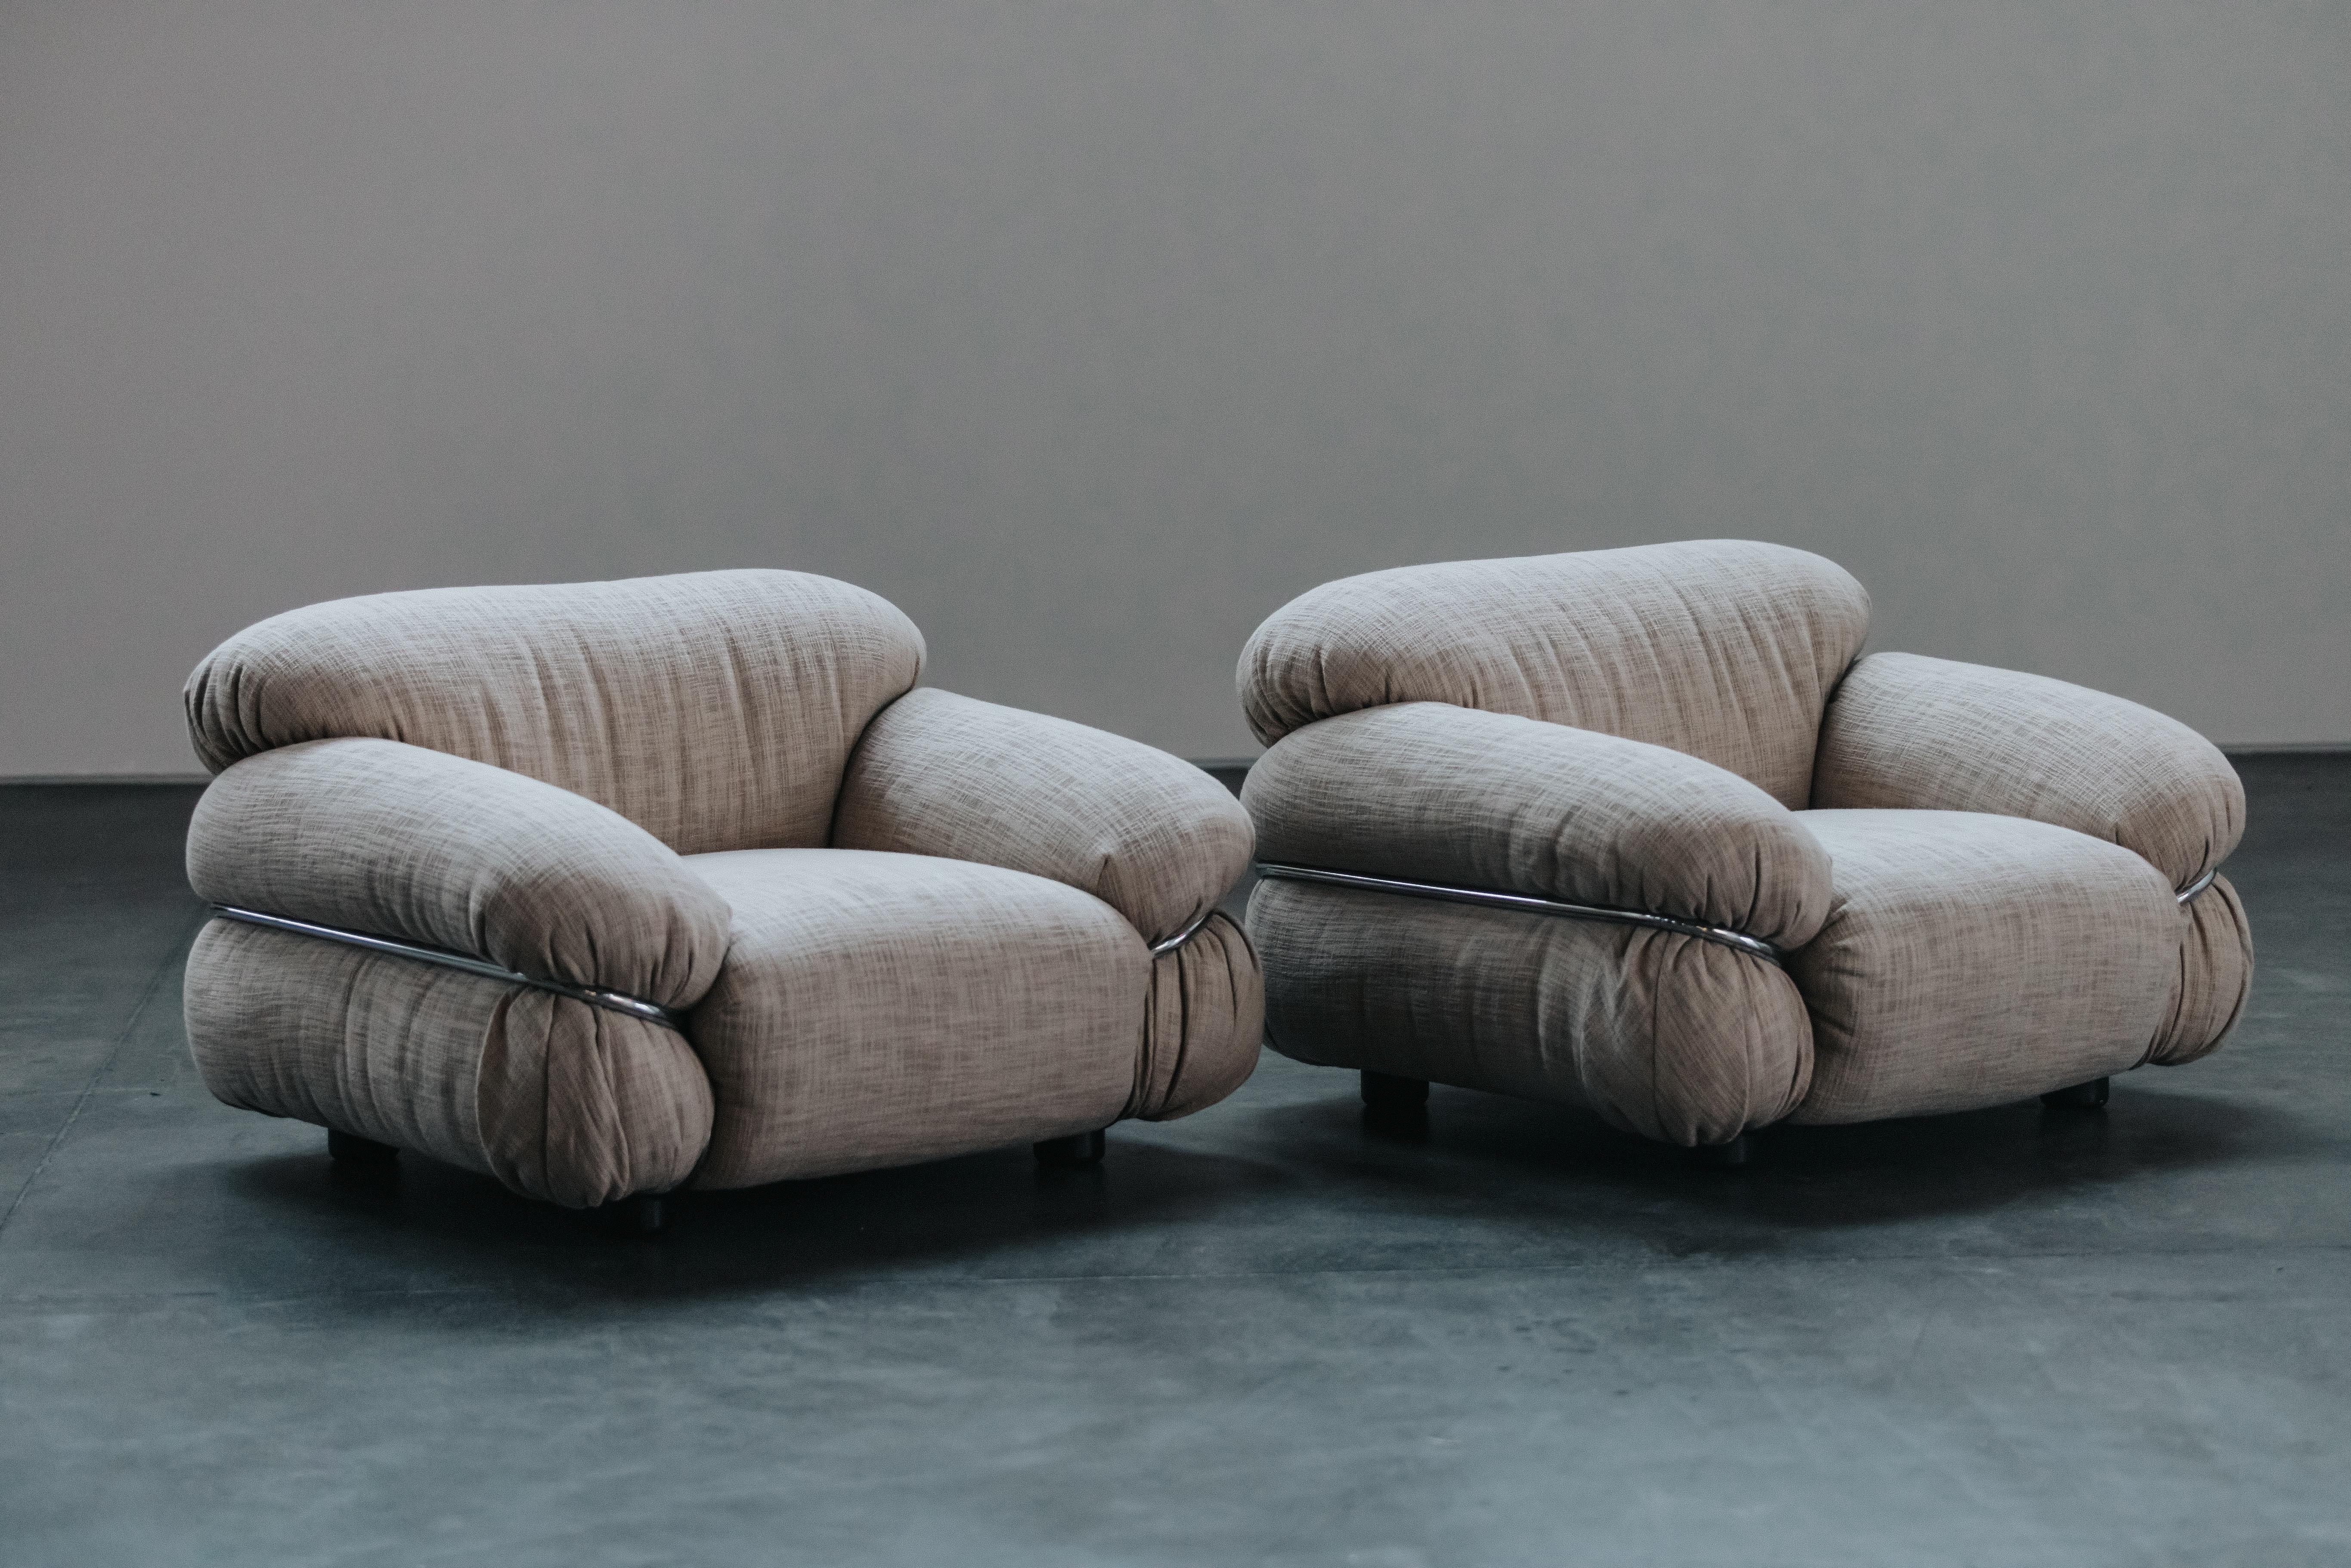 European Vintage Pair Of Lounge Chairs by Gianfranco Frattini for Cassina, 1972 For Sale